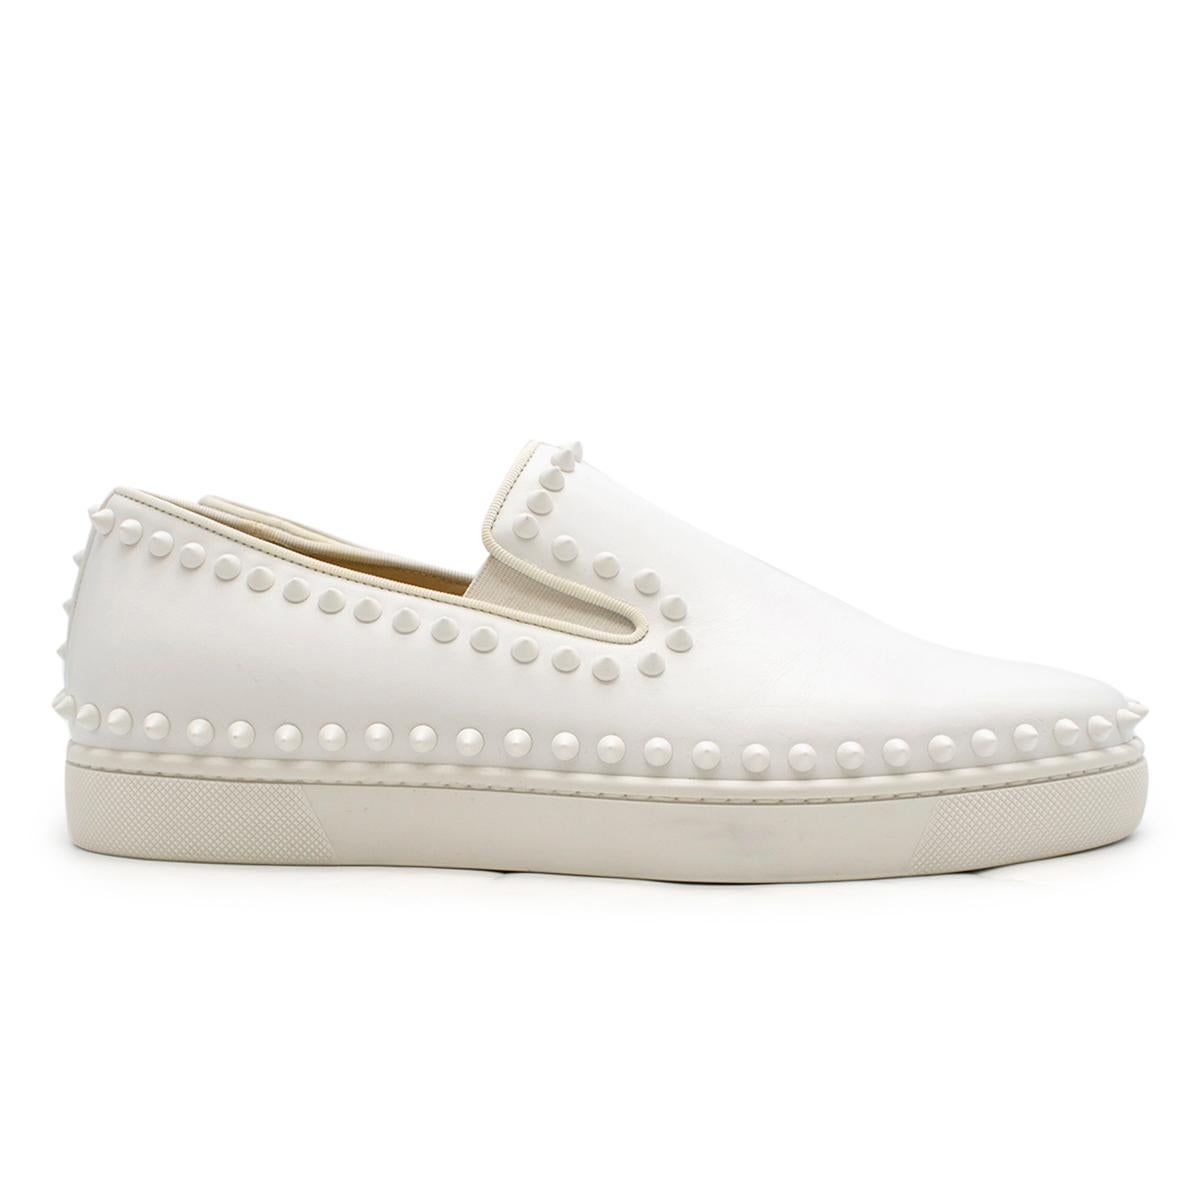 Christian Louboutin White Cador studded leather slip-on sneakers

-Smooth White leather
-white studded trim
-slip on
-classic red louboutin sole

Please note, these items are pre-owned and may show some signs of storage, even when unworn and unused.